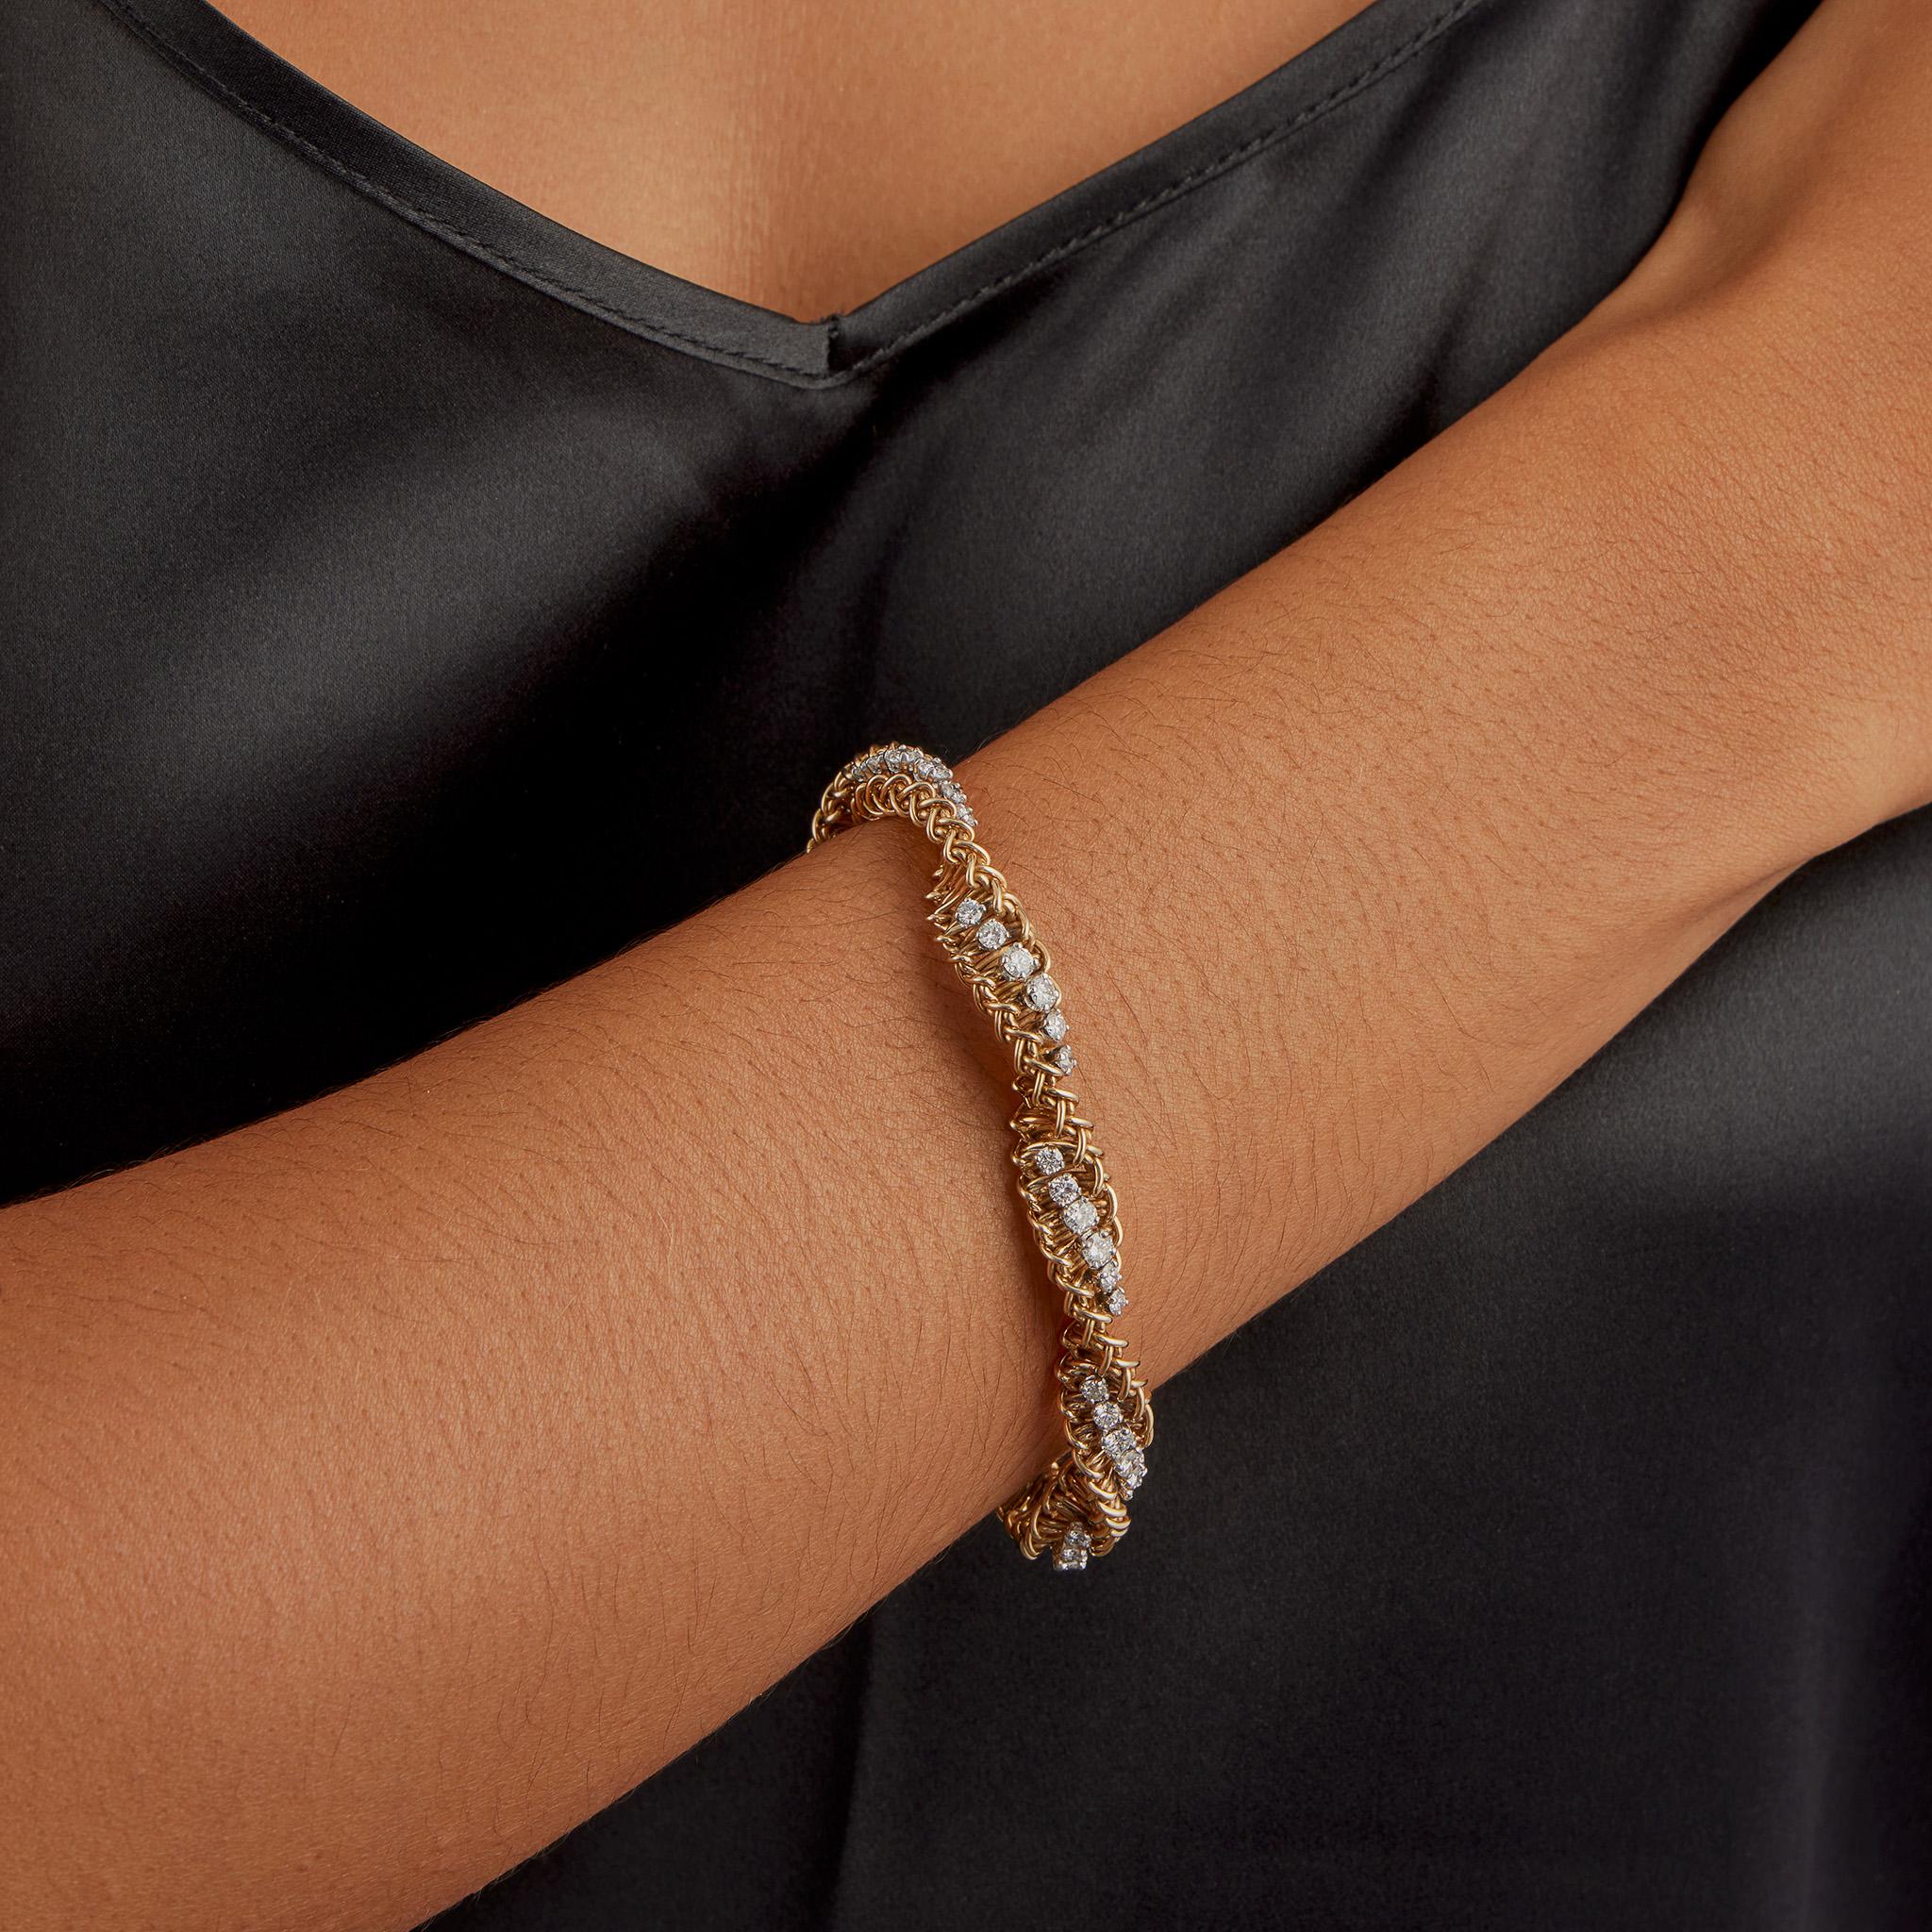 Created in the 1960s-1970s, this 18k gold ropetwist bracelet is set with over 5 carats of round brilliant-cut diamonds. It is designed as a twisting double helix of interlocking woven double wire, set at intervals with lines of round brilliant-cut